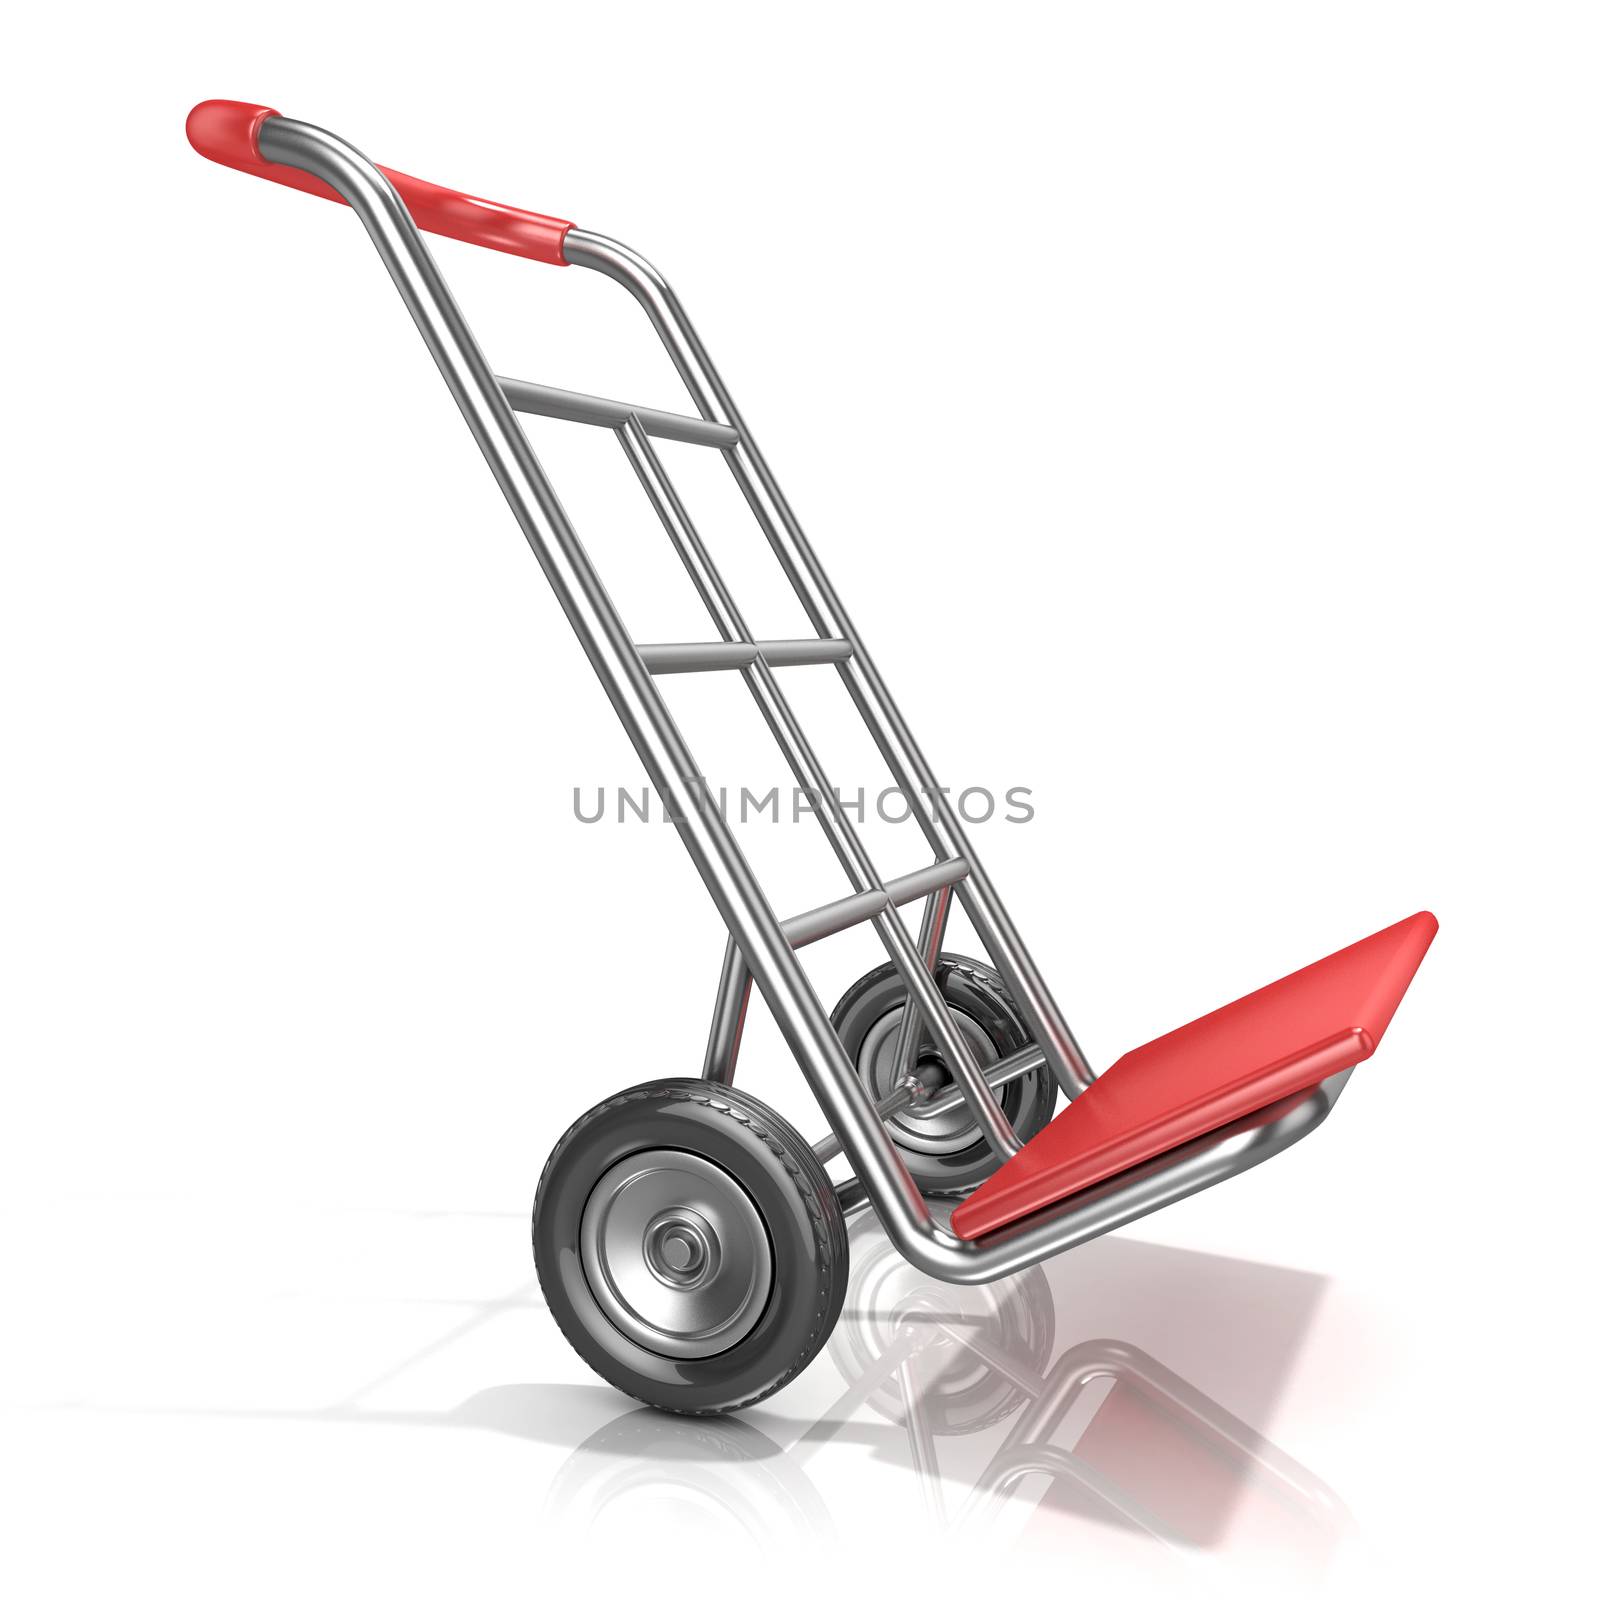 An empty hand truck, isolated on white background. 3D by djmilic